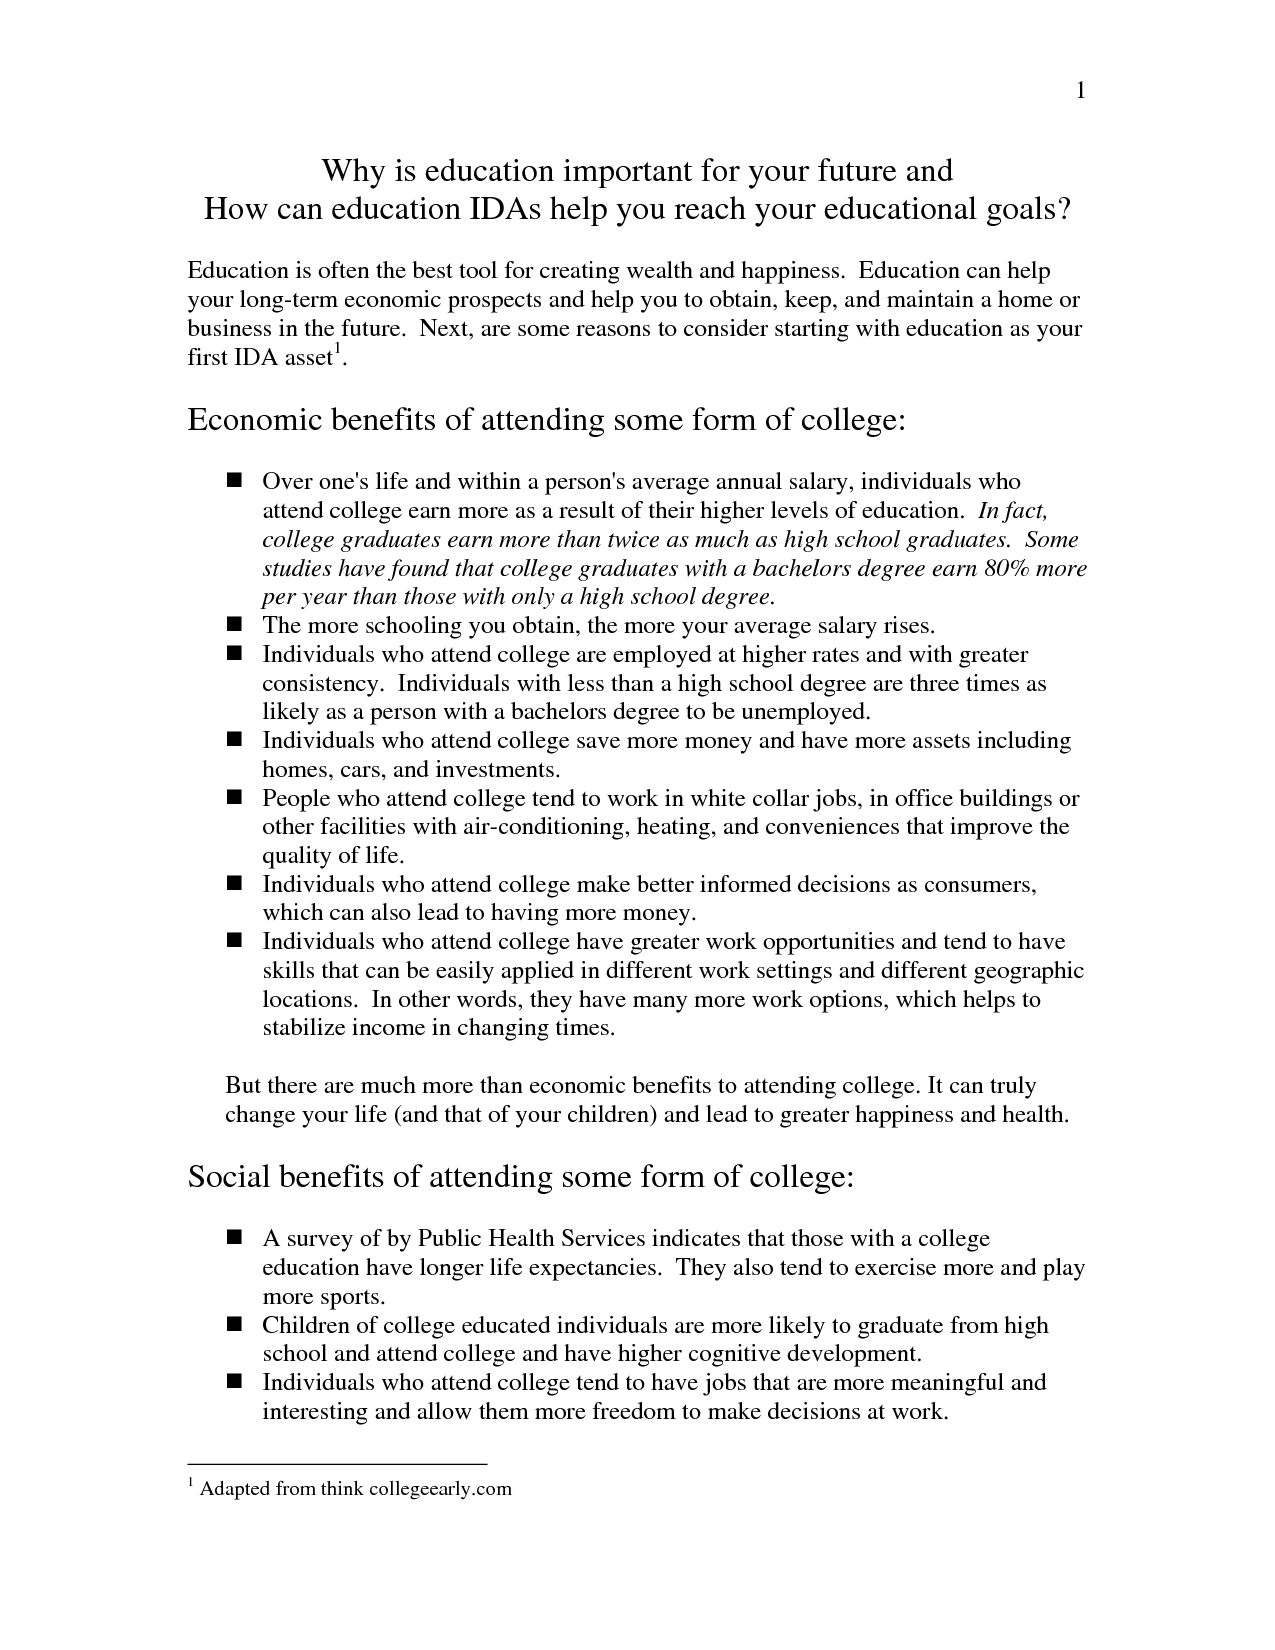 Essay on college education benefits